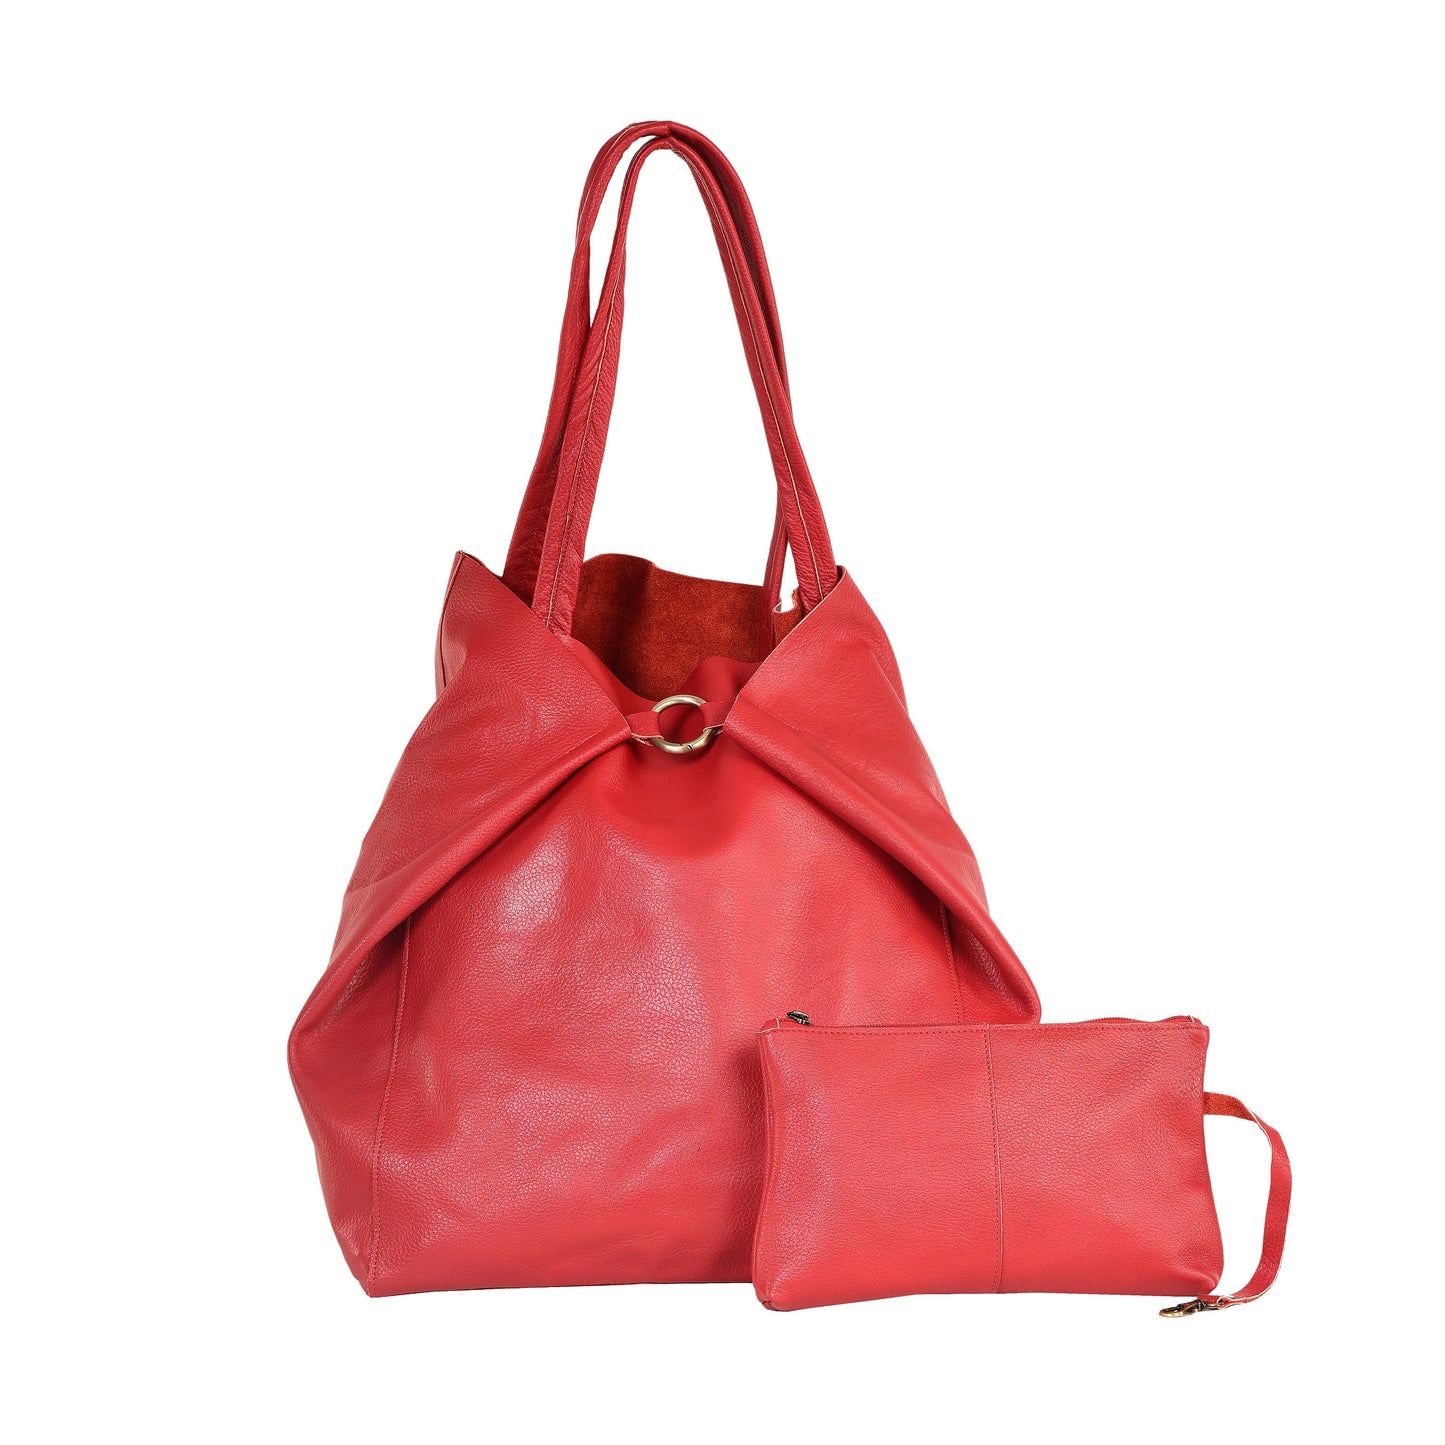 Red Oversize Tote Bag with Free Cosmetic Pouch Leather Shopper Bag Large Shoulder Purse Shopping Bag Oversized Bag Everyday Tote Bag